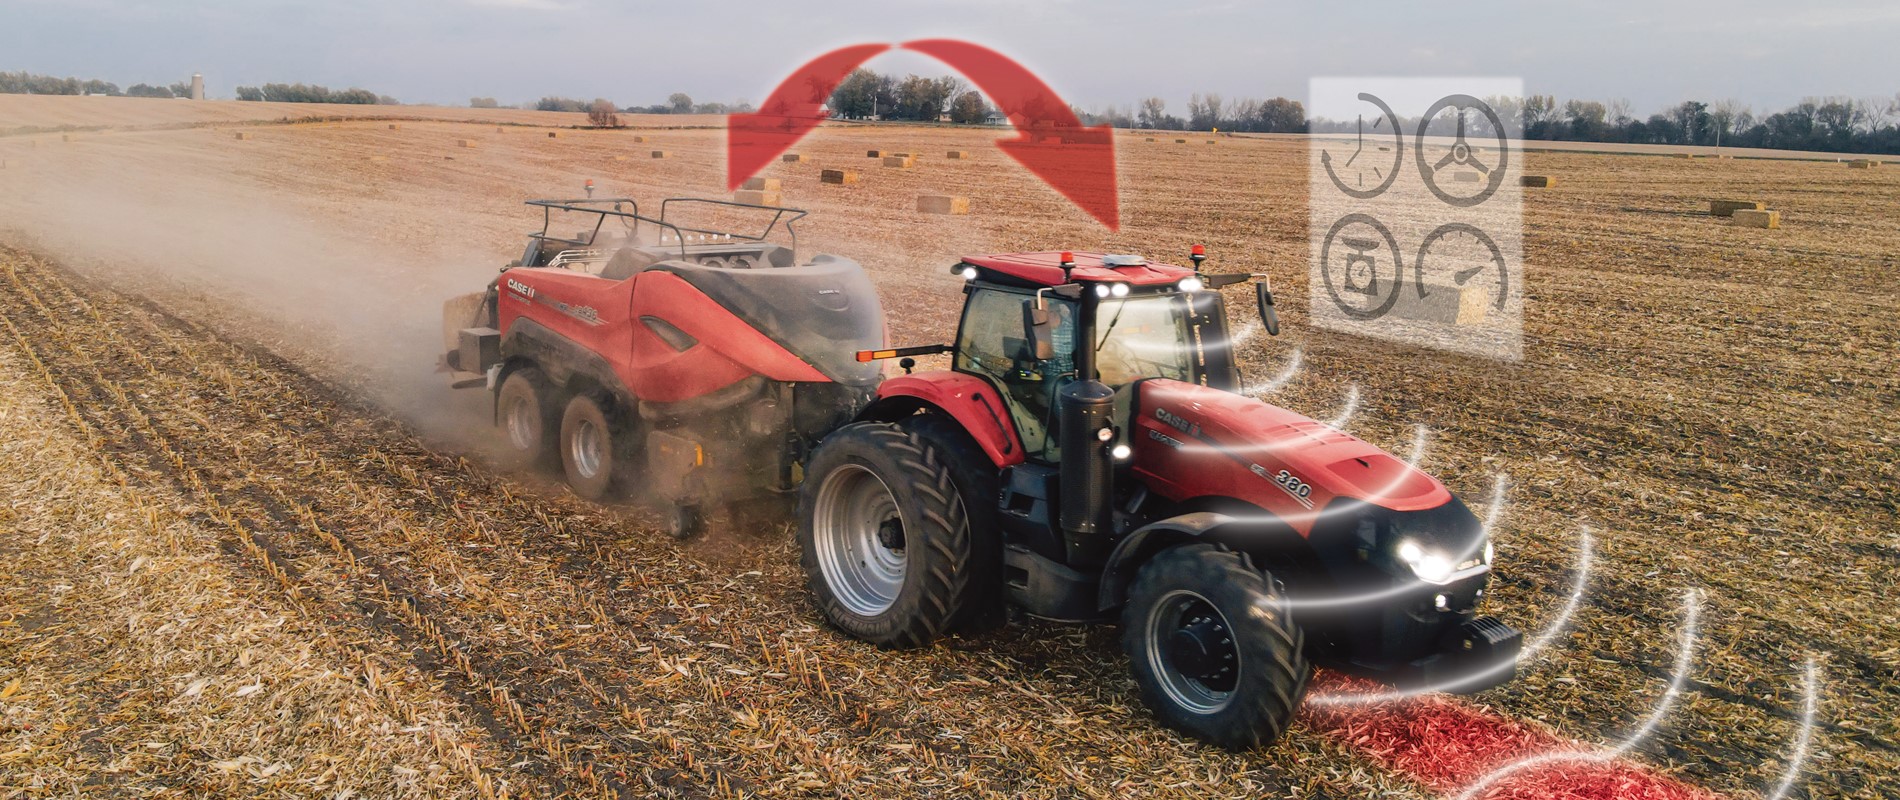 Case IH Brings LiDAR Technology to Hay Producers a first of its kind in Large Square Baler Automation